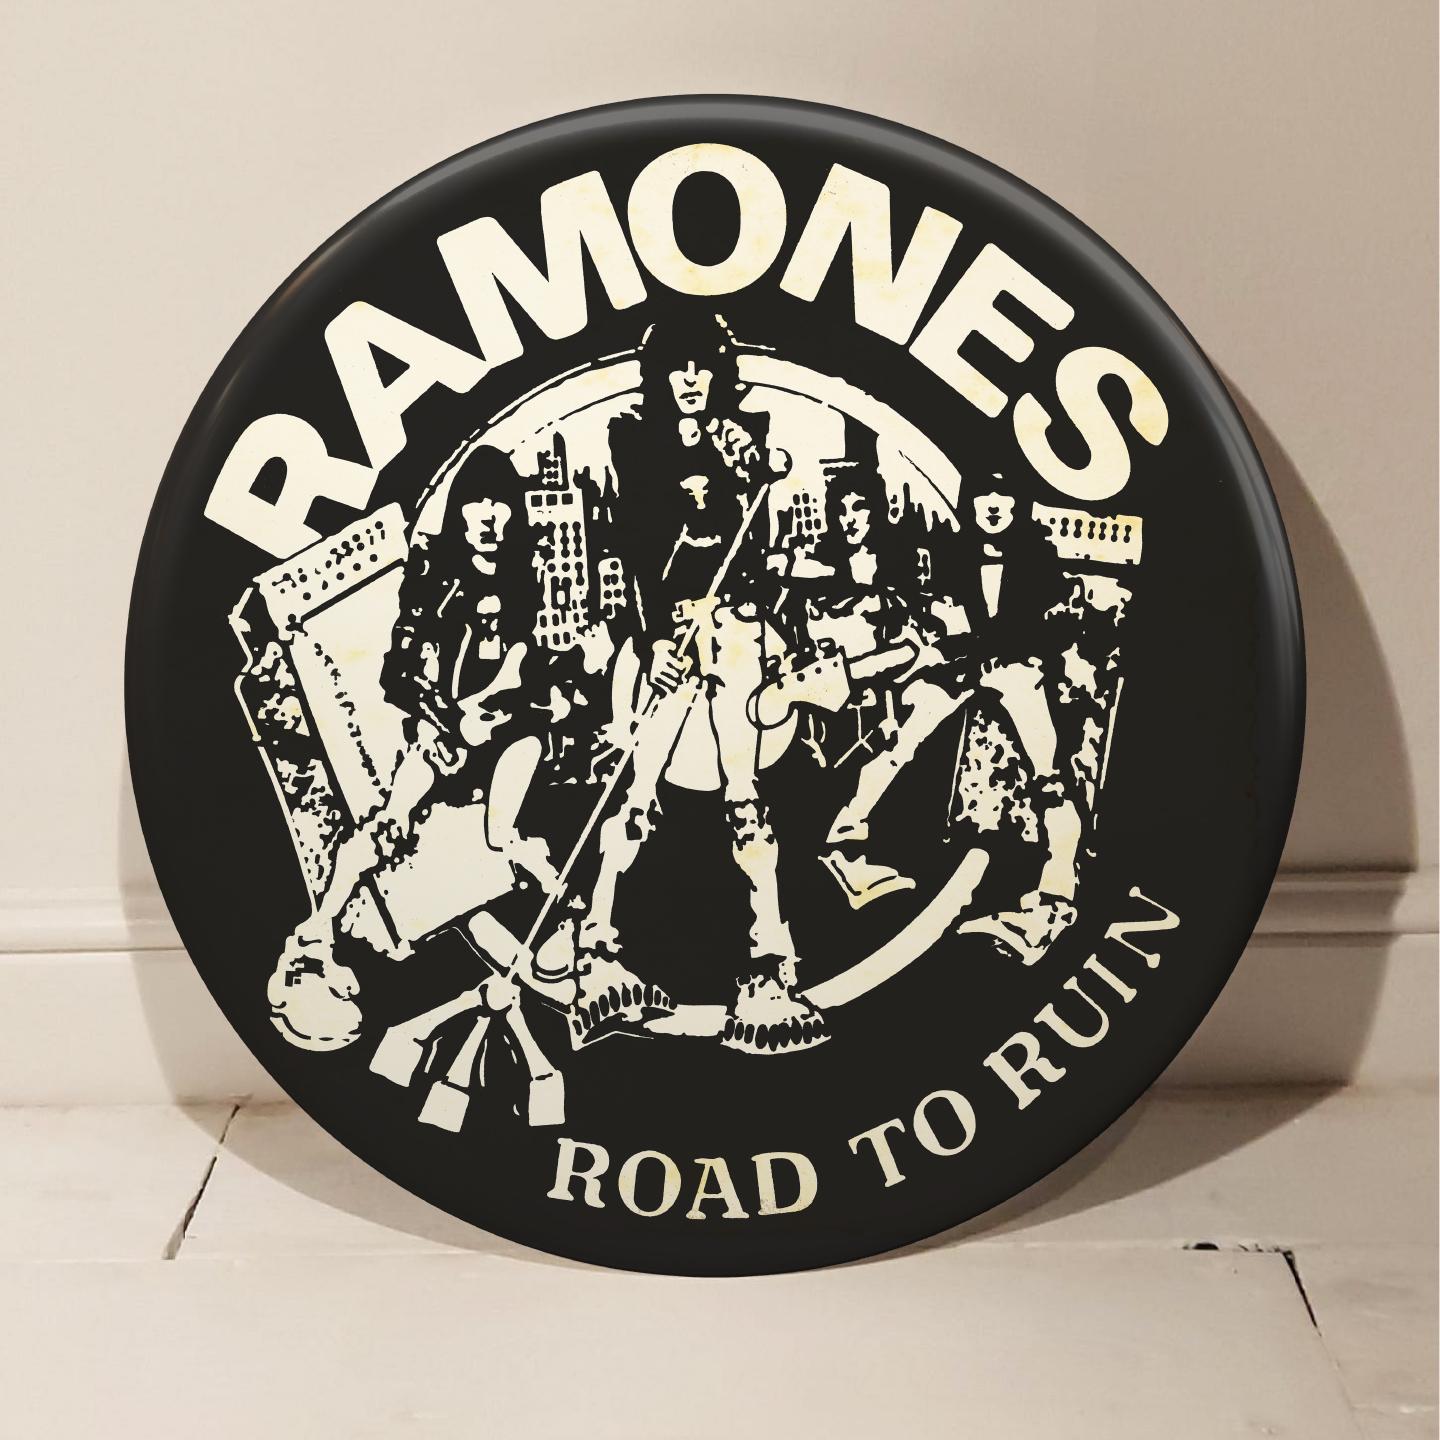 Ramones "Road To Ruin" Giant Handmade 3D Vintage Button - Mixed Media Art by Tony Dennis